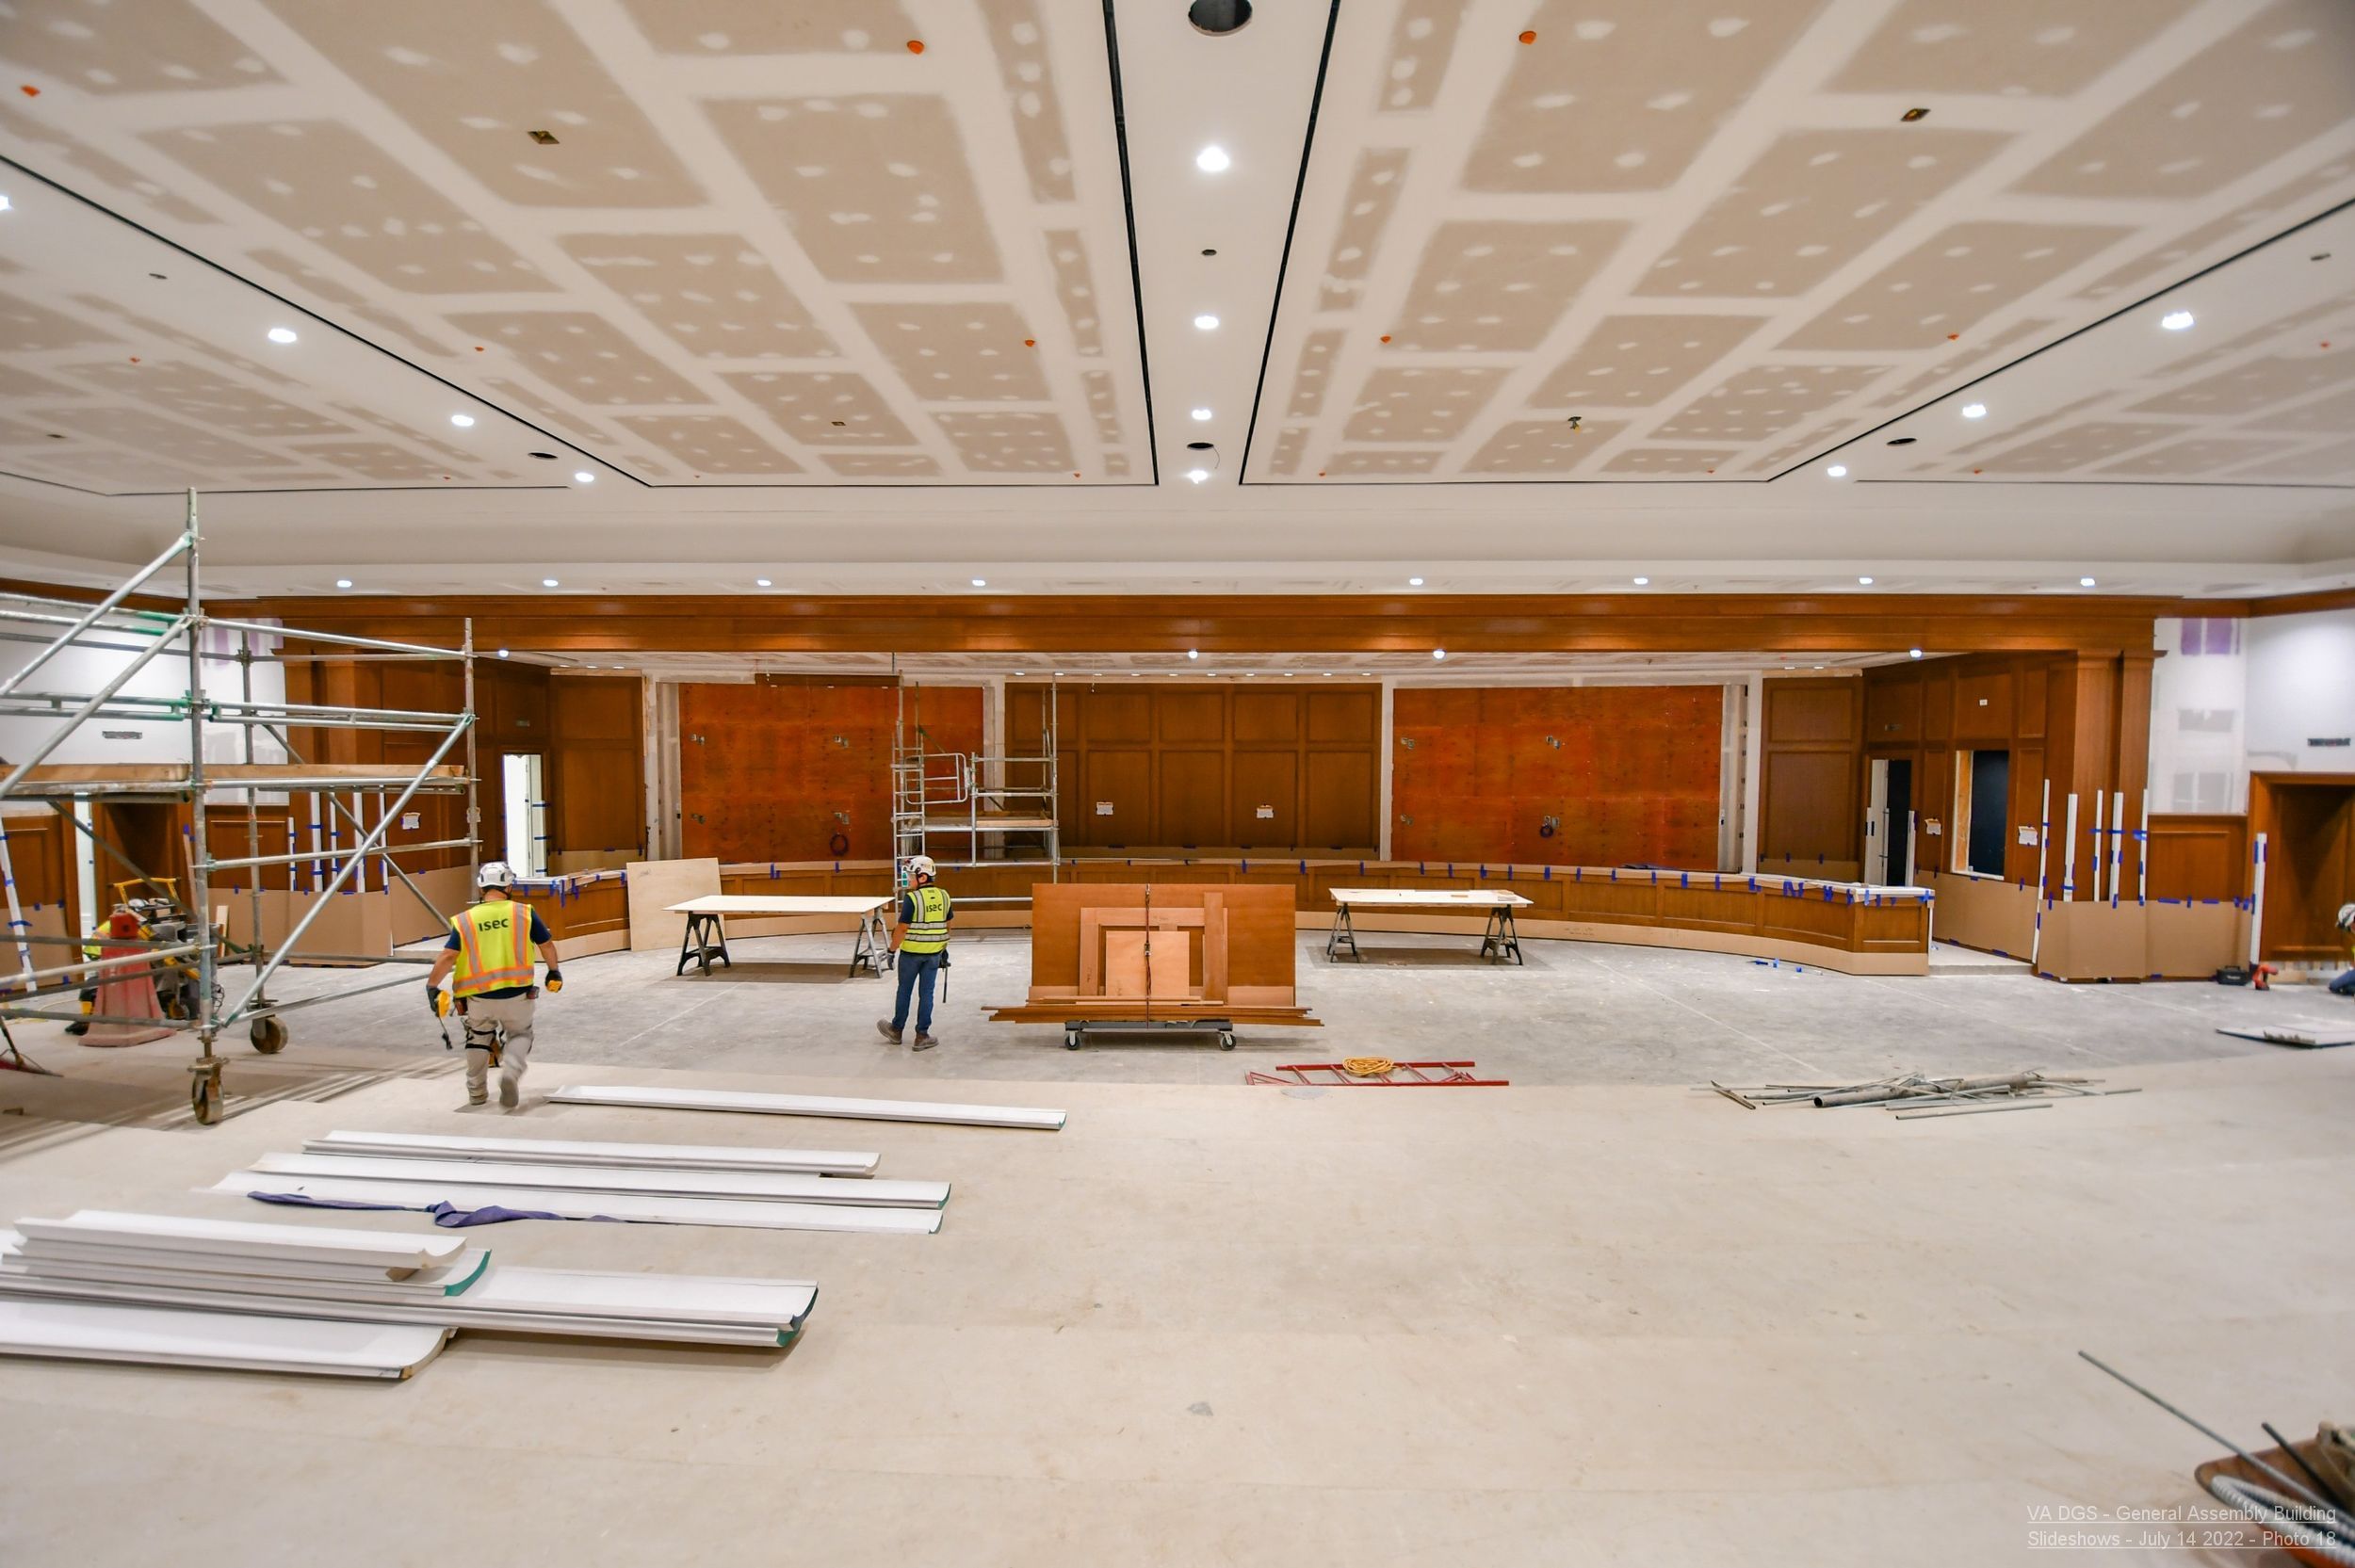 see-inside-virginia-s-new-general-assembly-building-axios-richmond